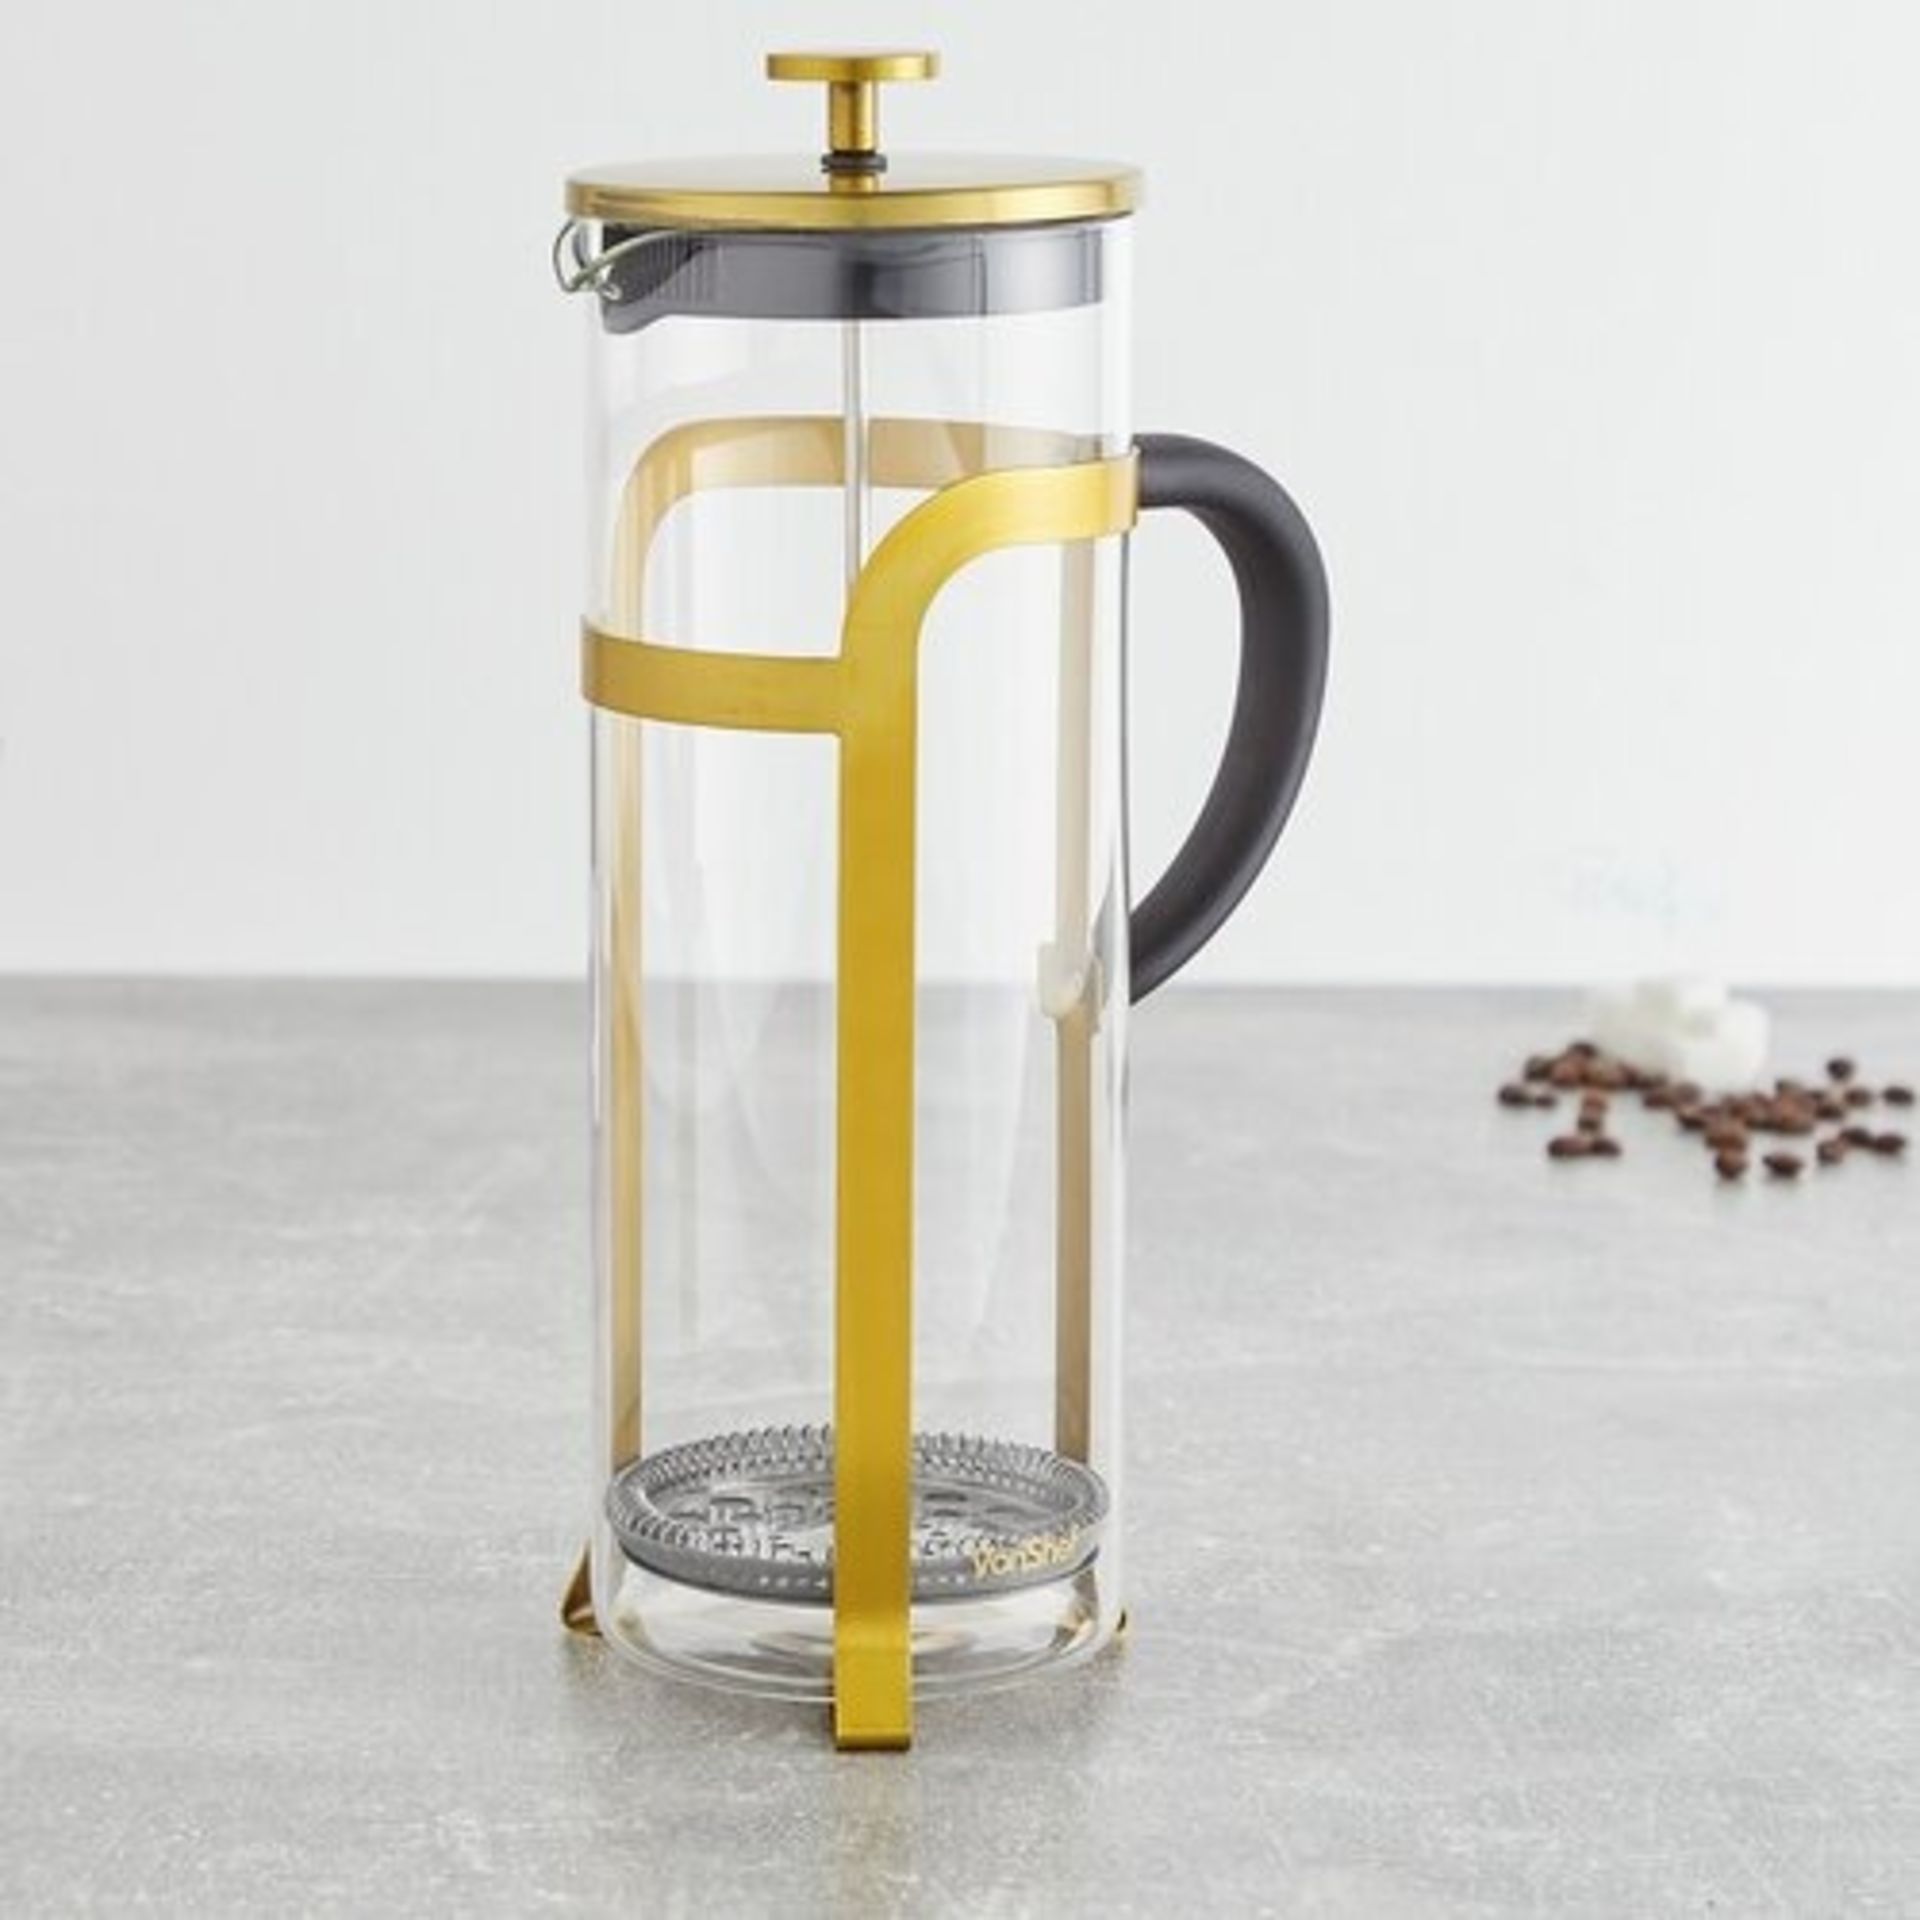 1.5L Chrome Glass Cafetiere - Coffee Makers - ER33